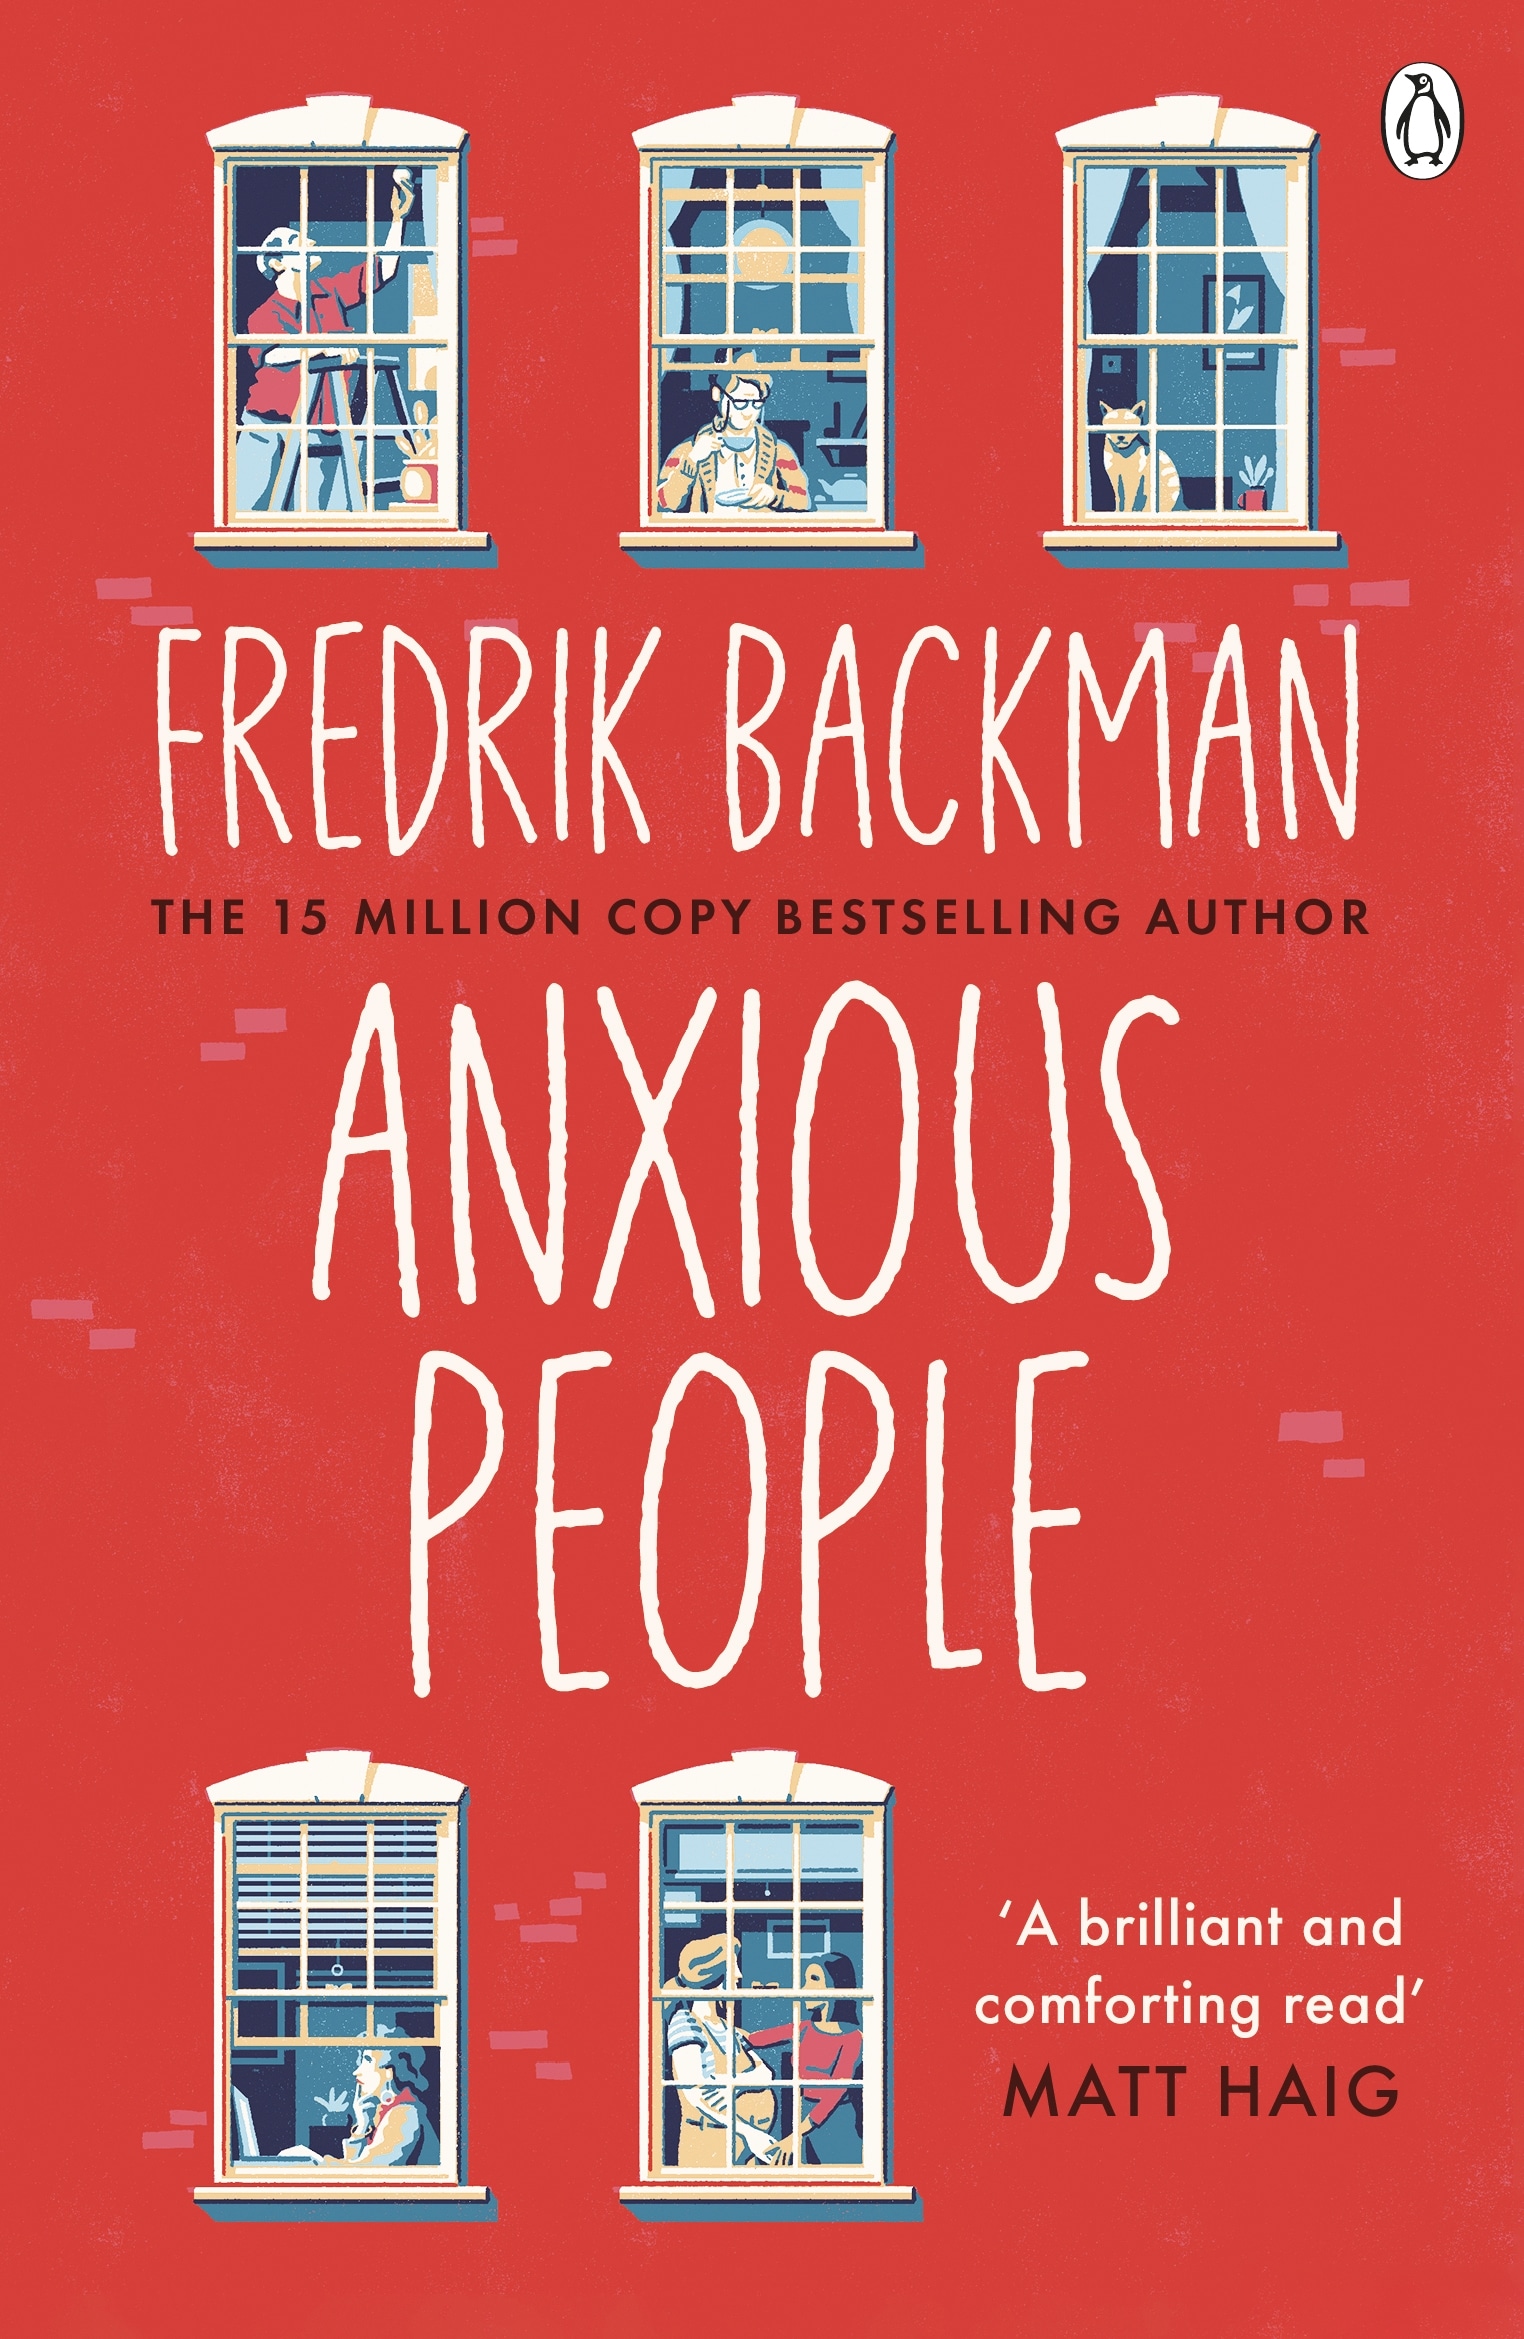 Book “Anxious People” by Fredrik Backman — August 19, 2021